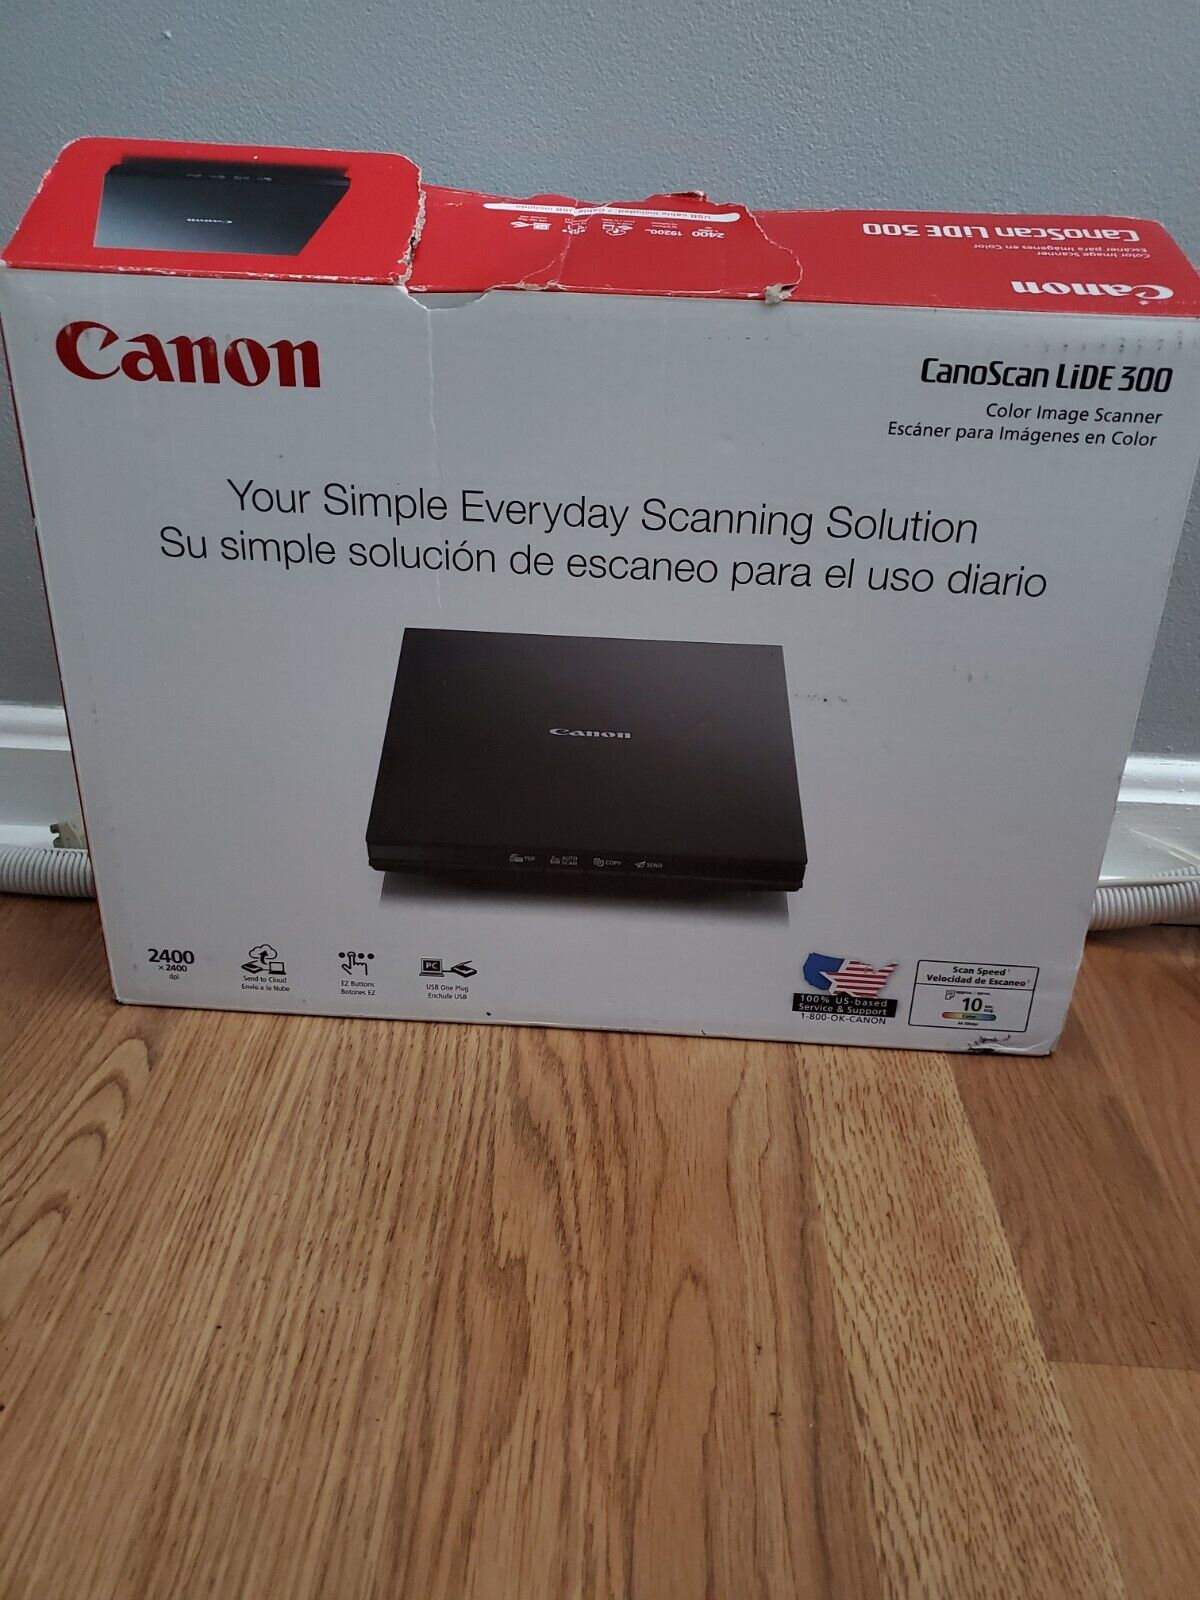 NEW OPEN BOX Canon CanoScan LiDE 300 Compact Slim Color Flatbed Image Scanner